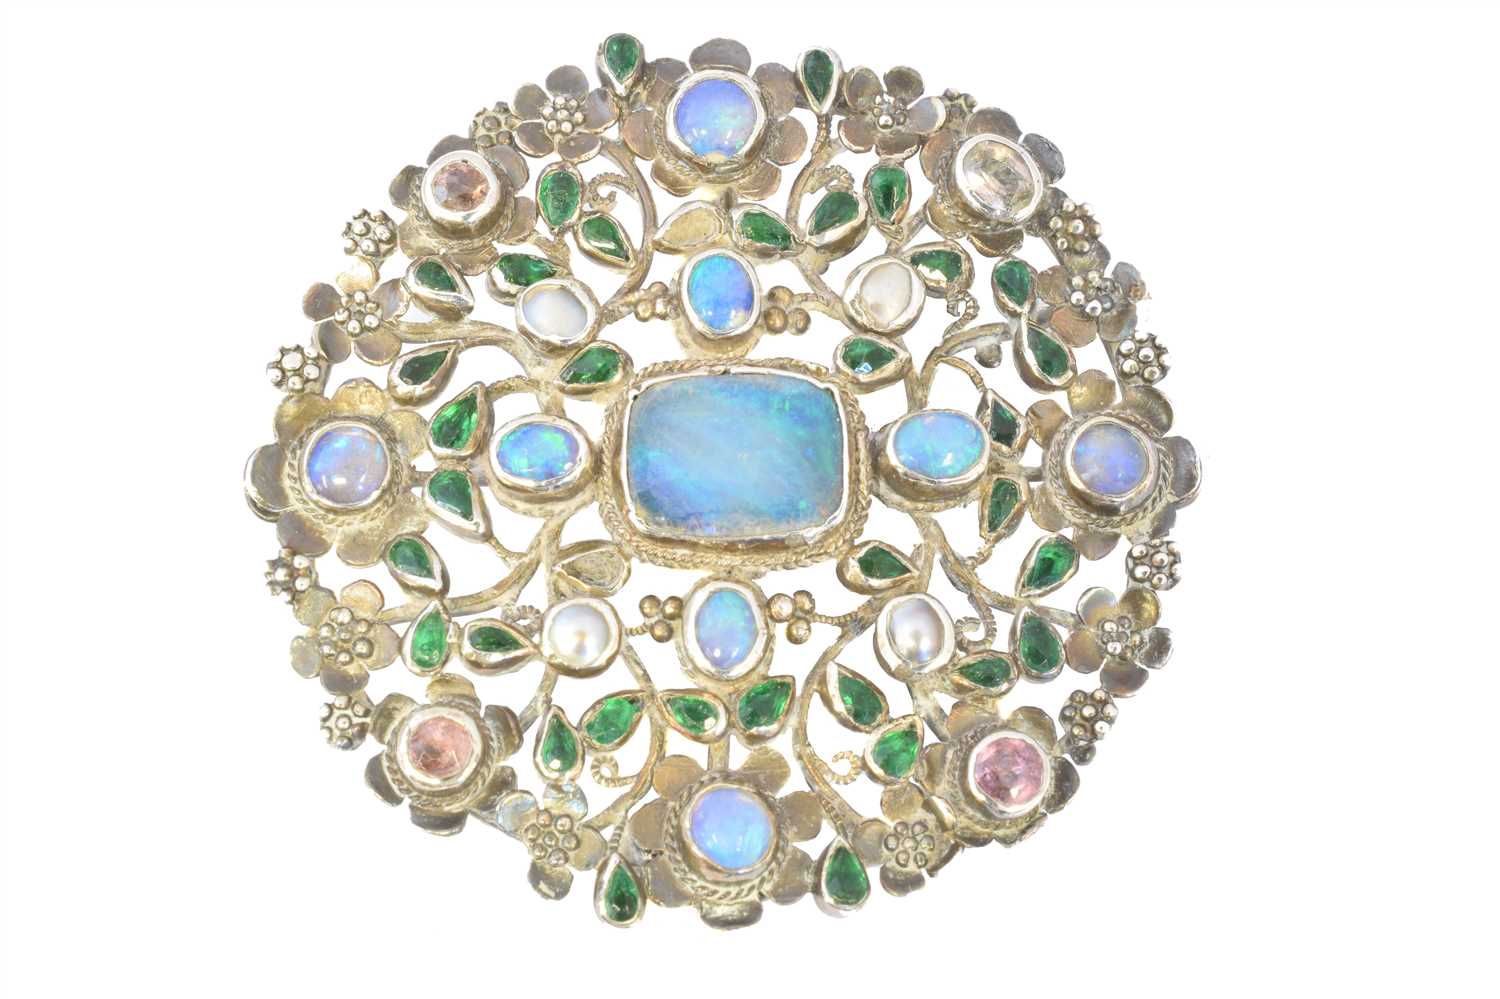 Lot 83 - An Arts & Crafts opal and vari gem brooch attributed to Arthur and Georgie Gaskin